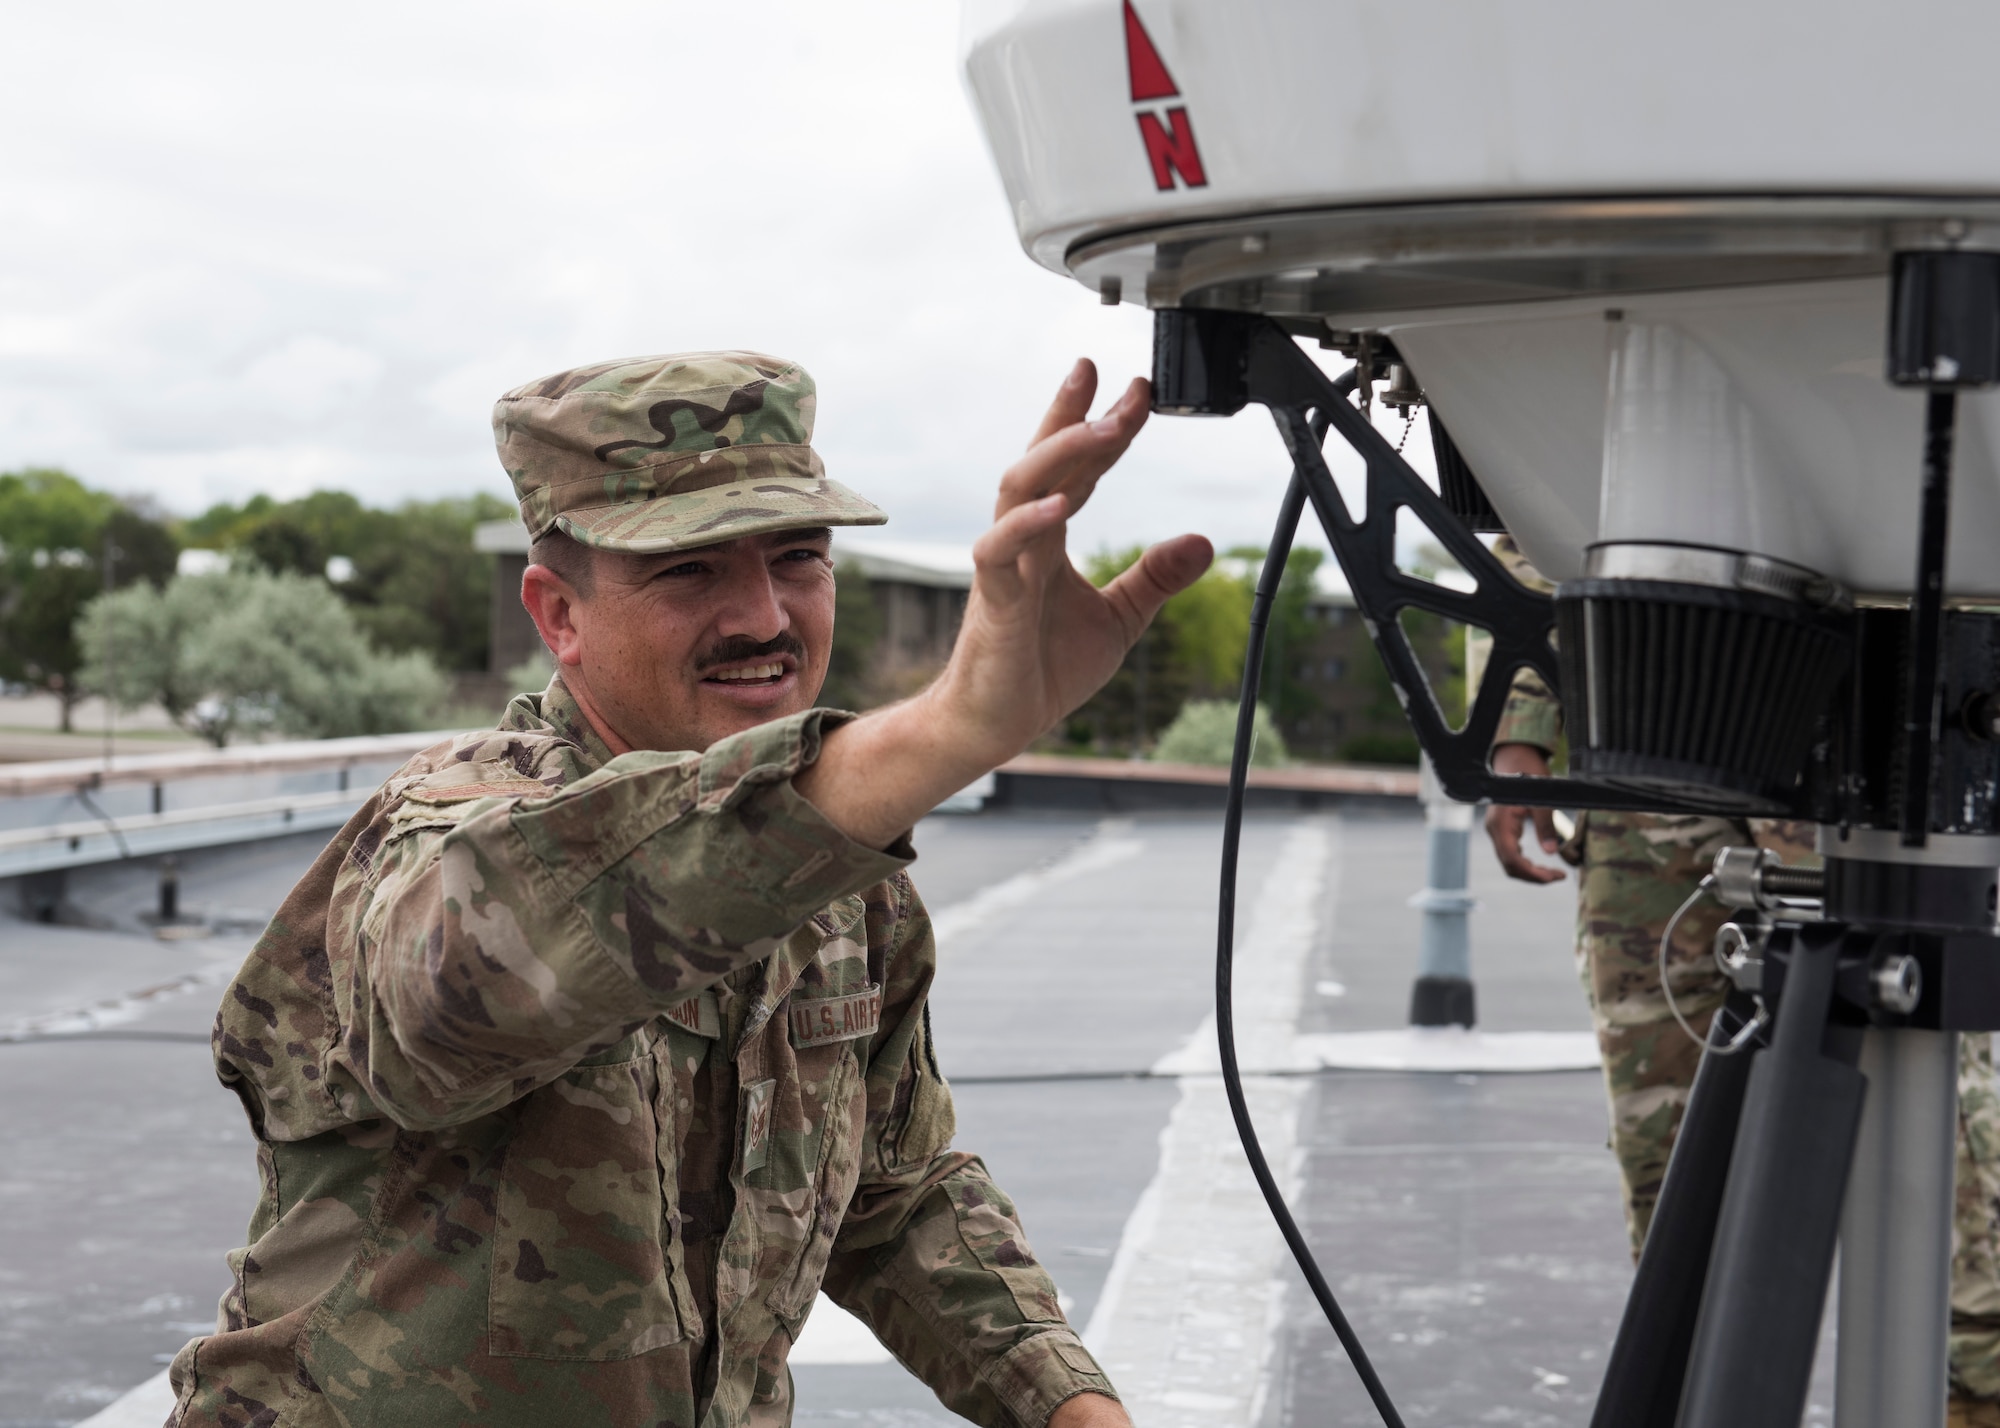 Staff Sgt. Daniel Robinson, 2nd Combat Weather Systems Squadron weather system trainer from Hurlburt Field, Florida, assembles a Doppler system May 25, 2019, at Mountain Home Air Force Base, Idaho. The is the first time the Doppler system has been installed on a Continental United States base. (U.S. Air Force photo by Senior Airman Tyrell Hall)